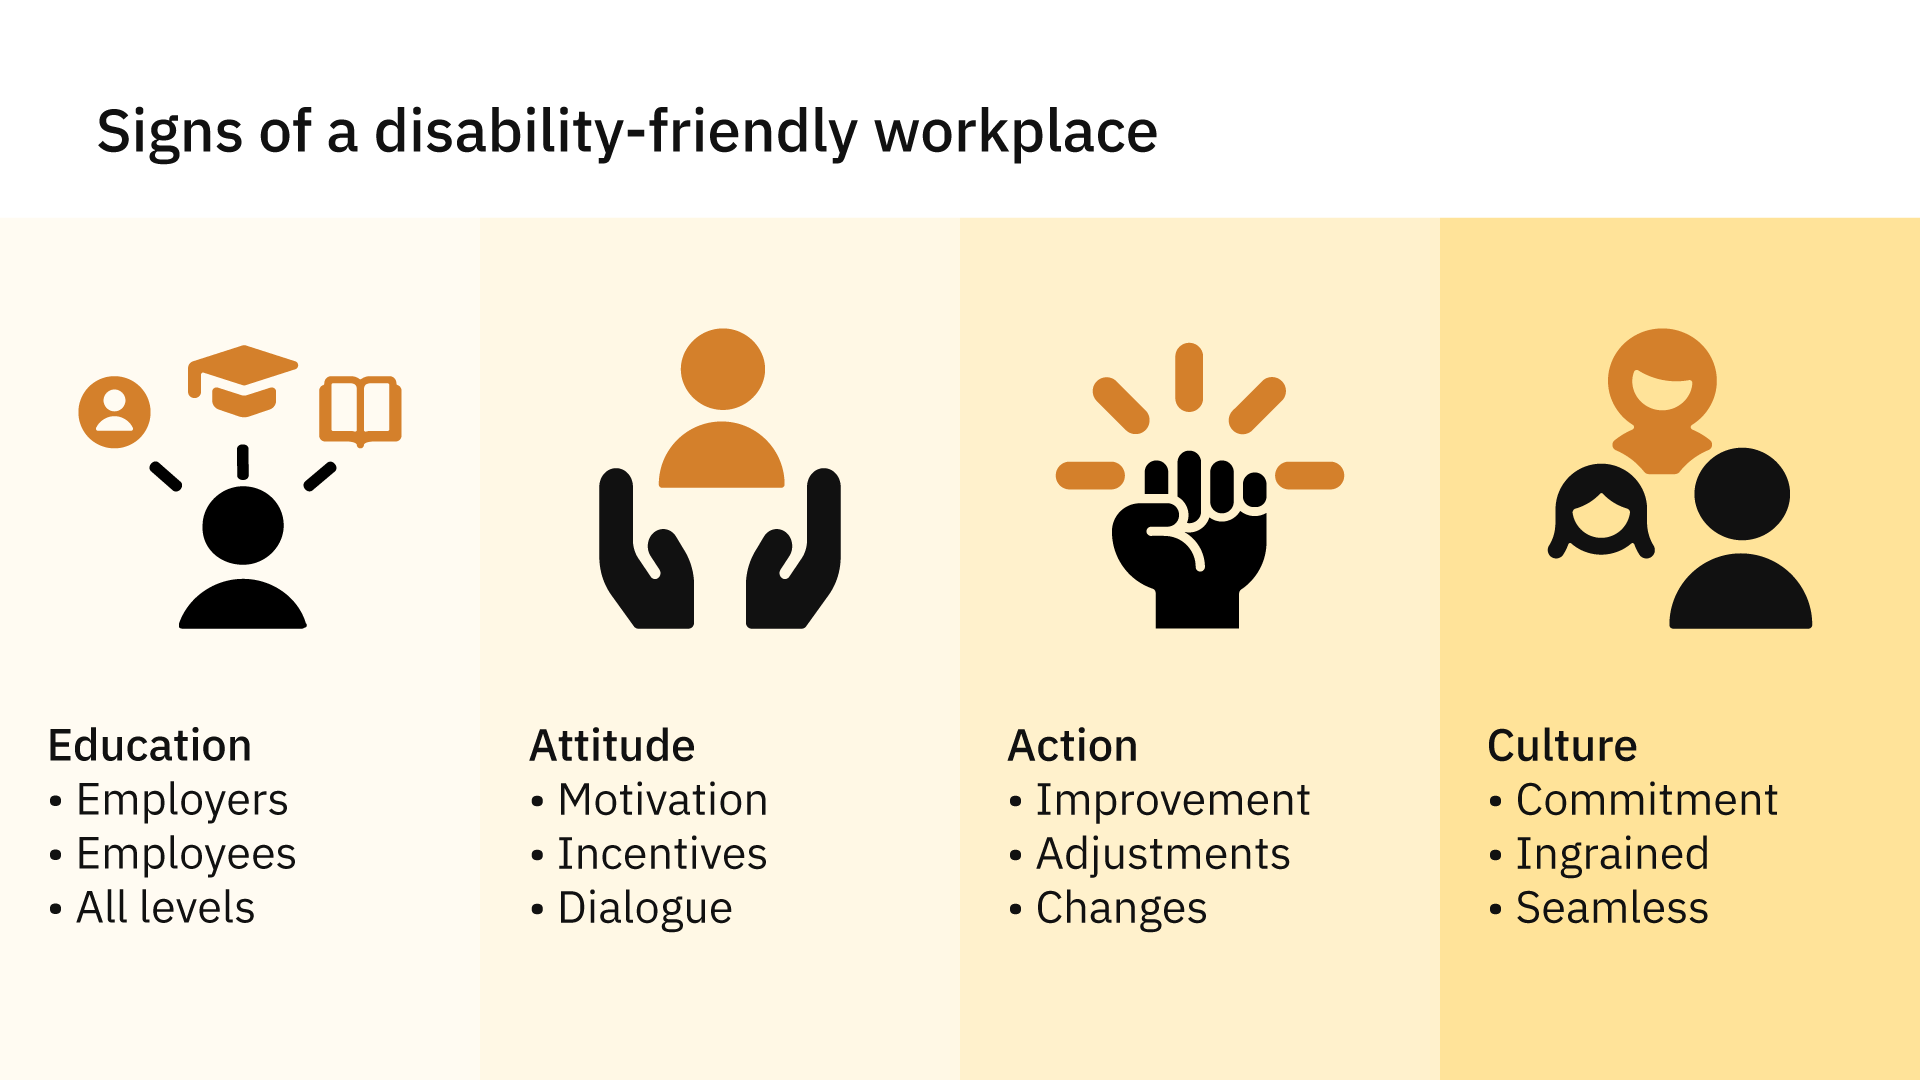 Signs of a disability-friendly workplace.